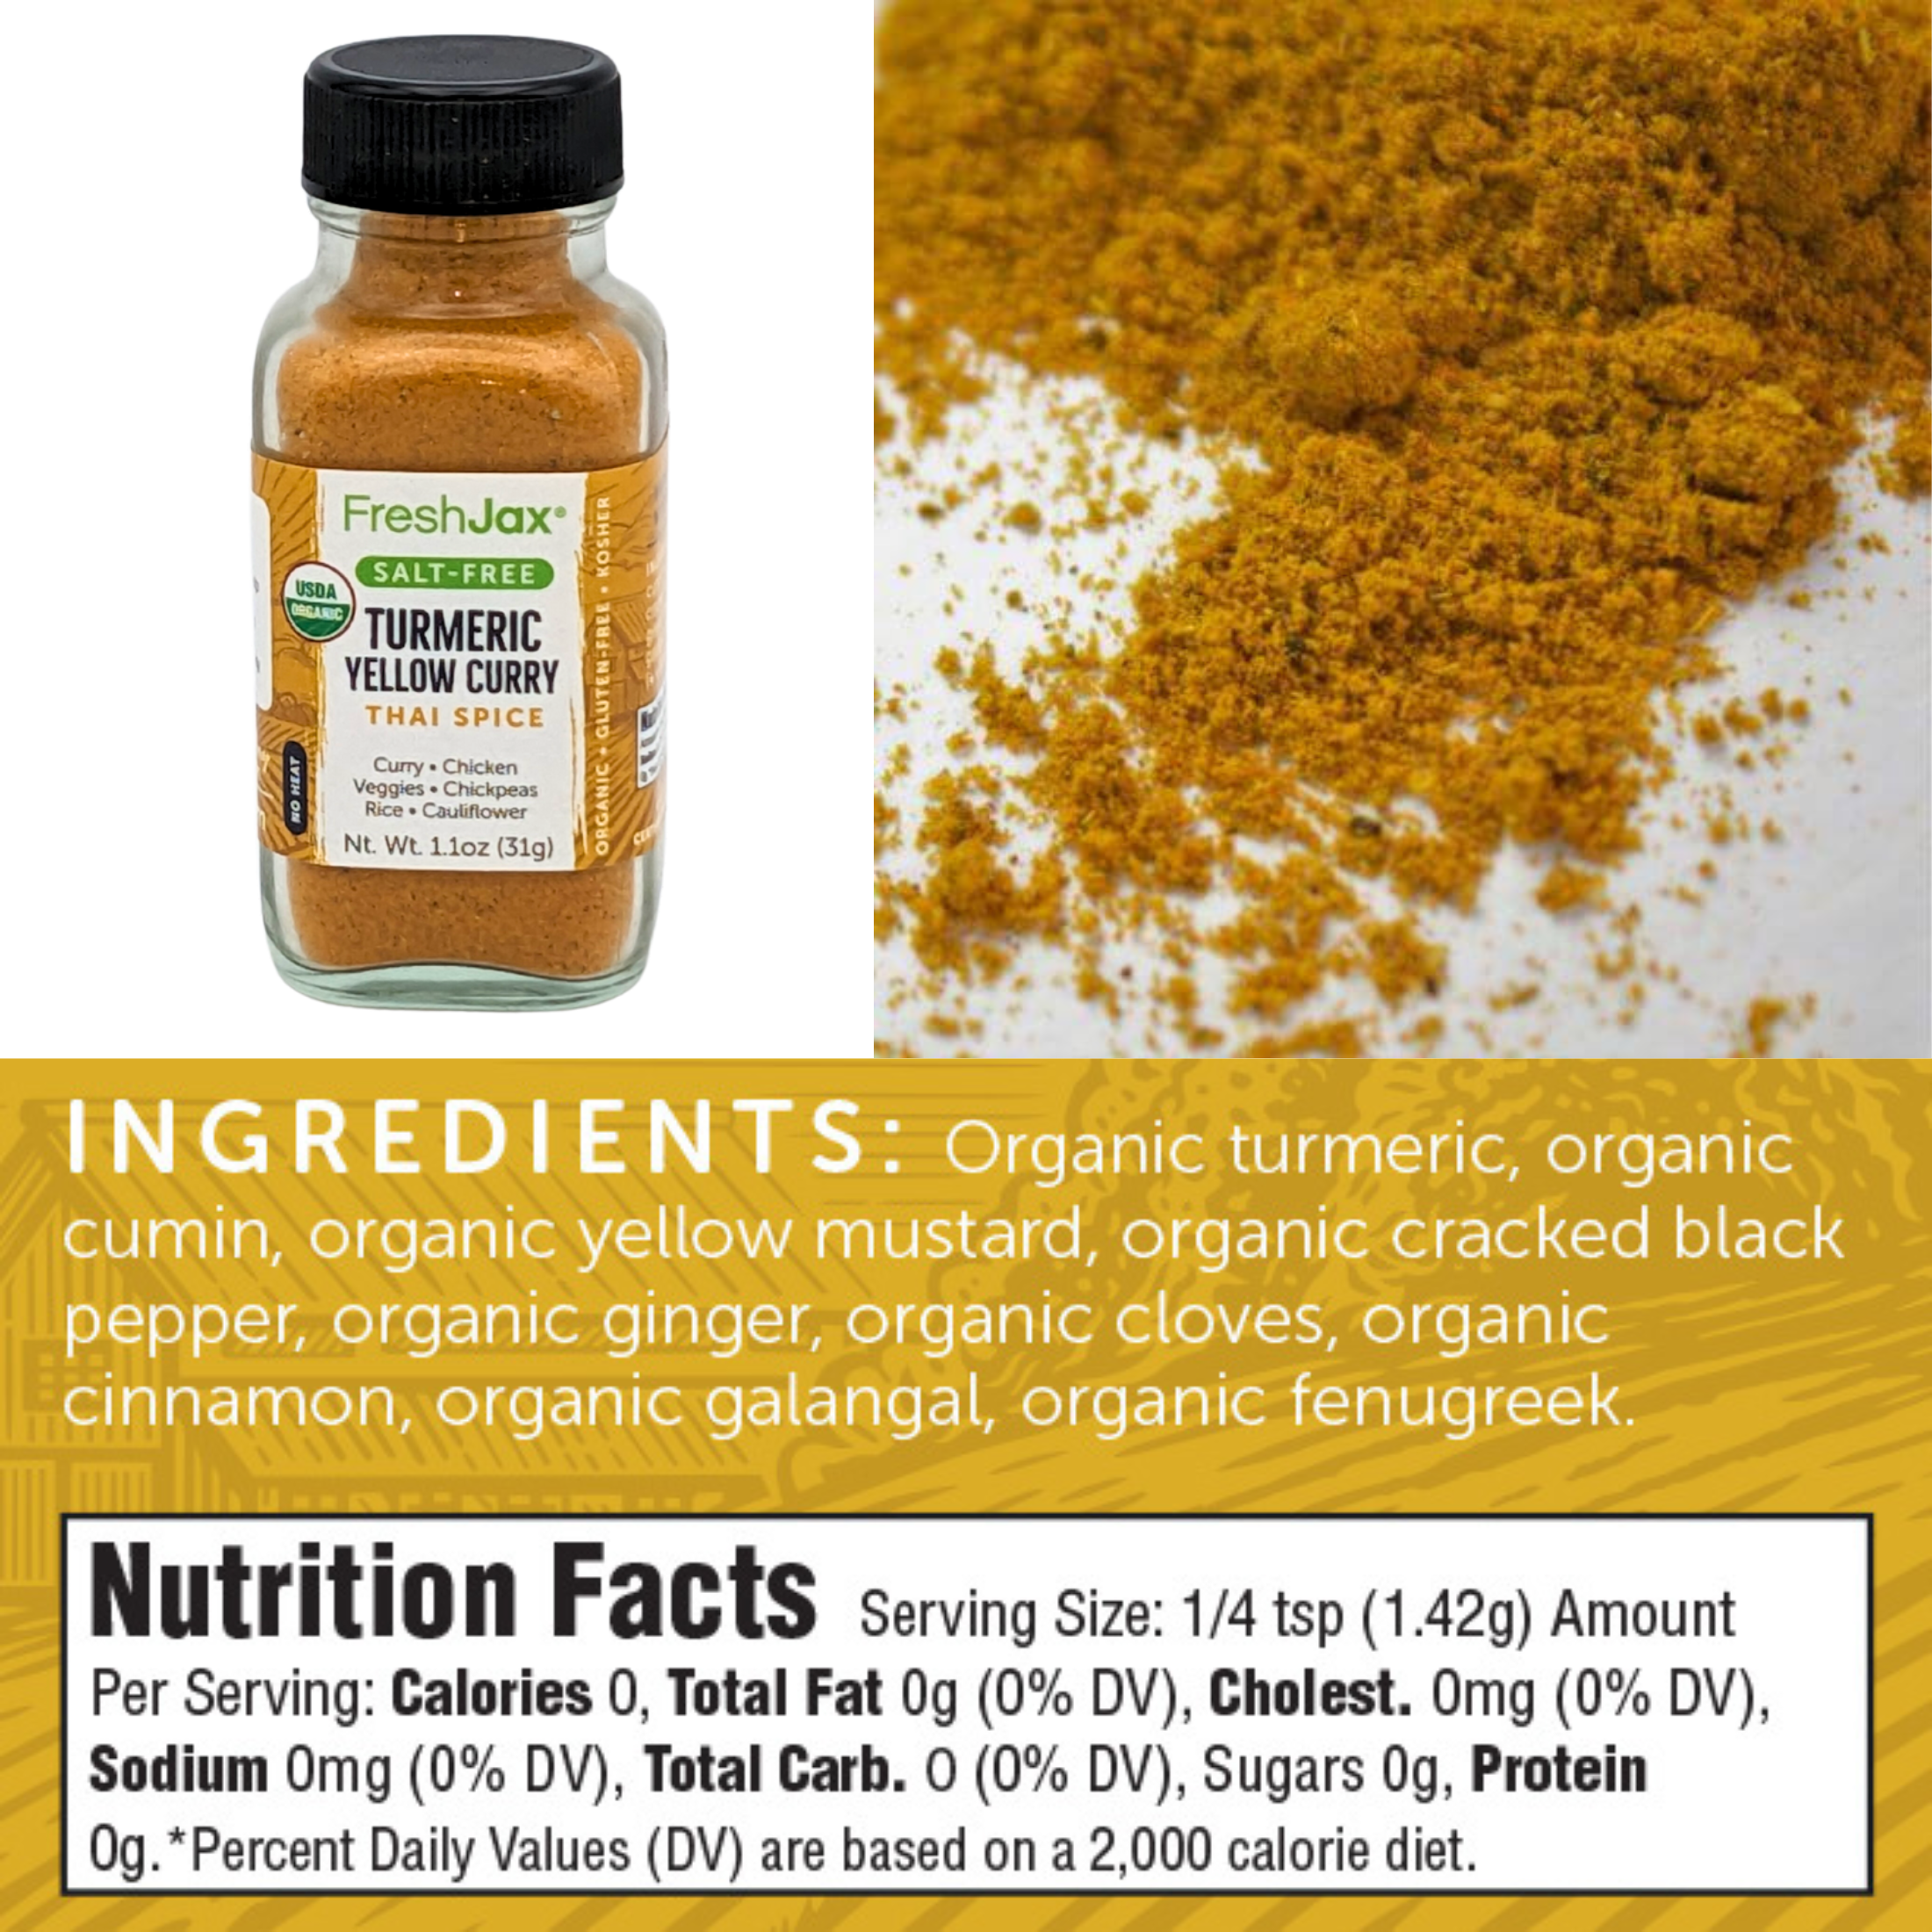 FreshJax Organic Spices Salt-Free Turmeric Yellow Curry Ingredient and Nutritional Information